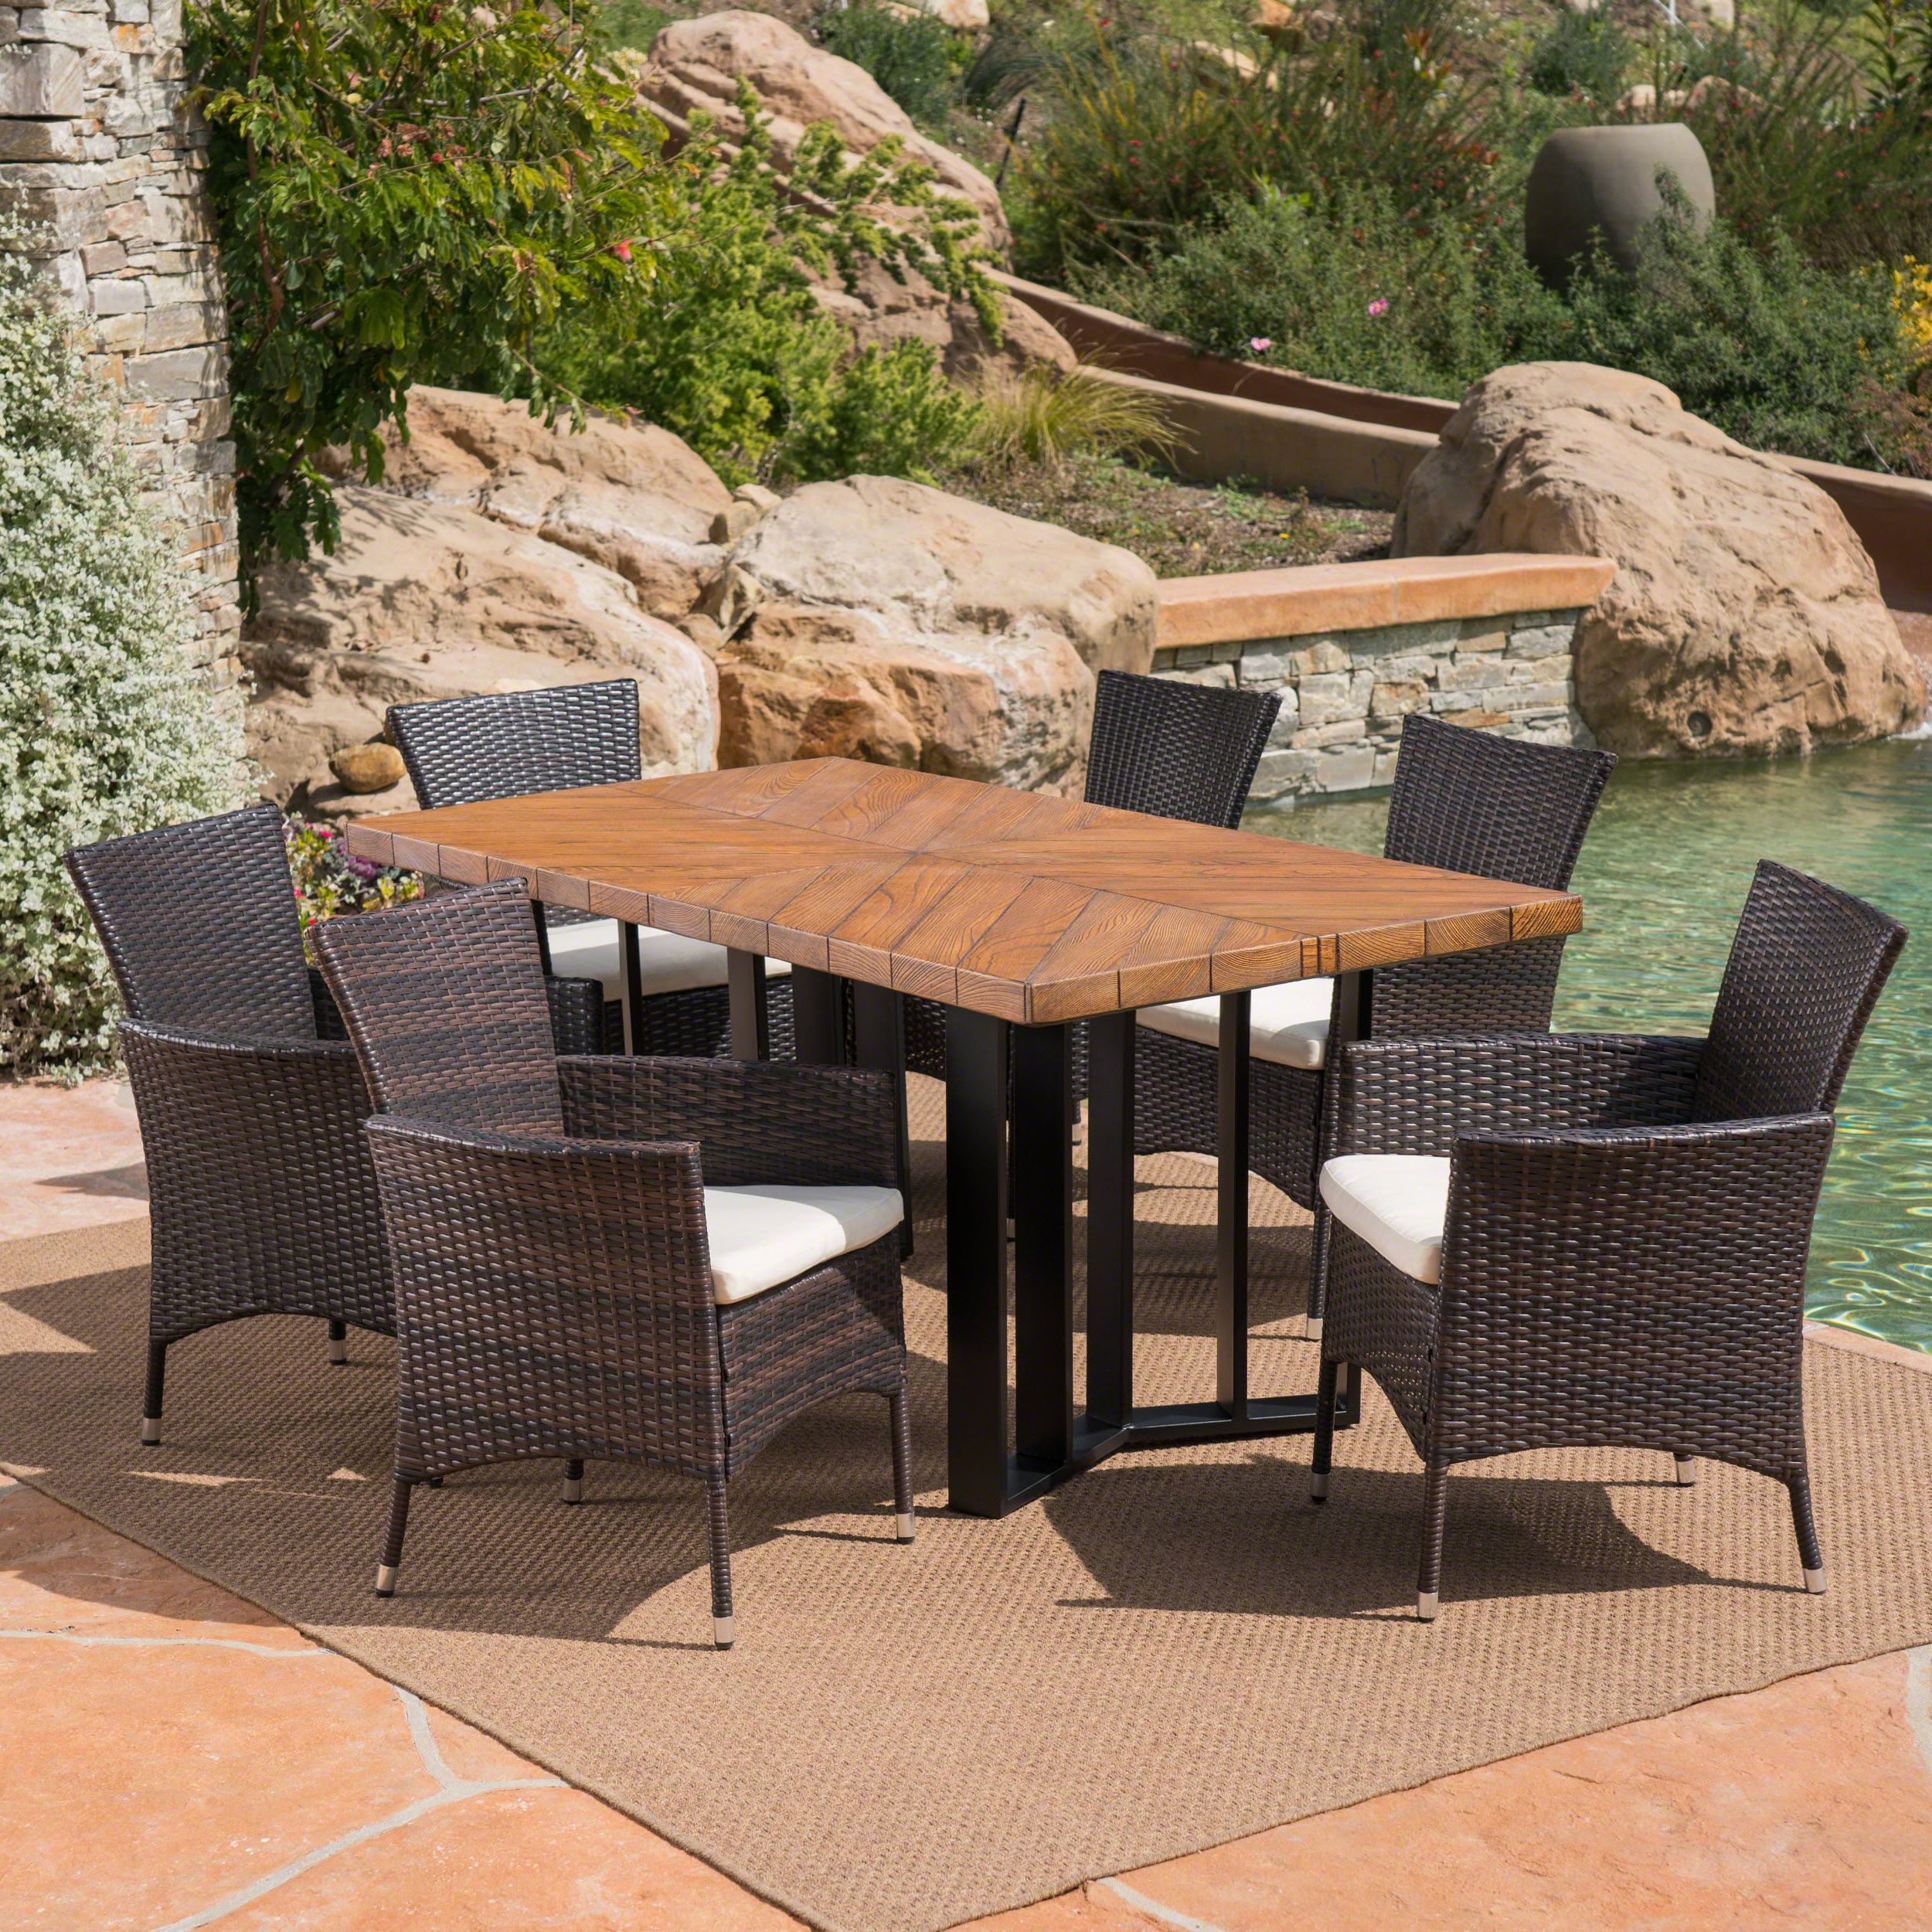 Tyler Outdoor 7 Piece Wicker Dining Set With Finish Light Weight For Current Patio Dining Sets With Cushions (View 4 of 15)